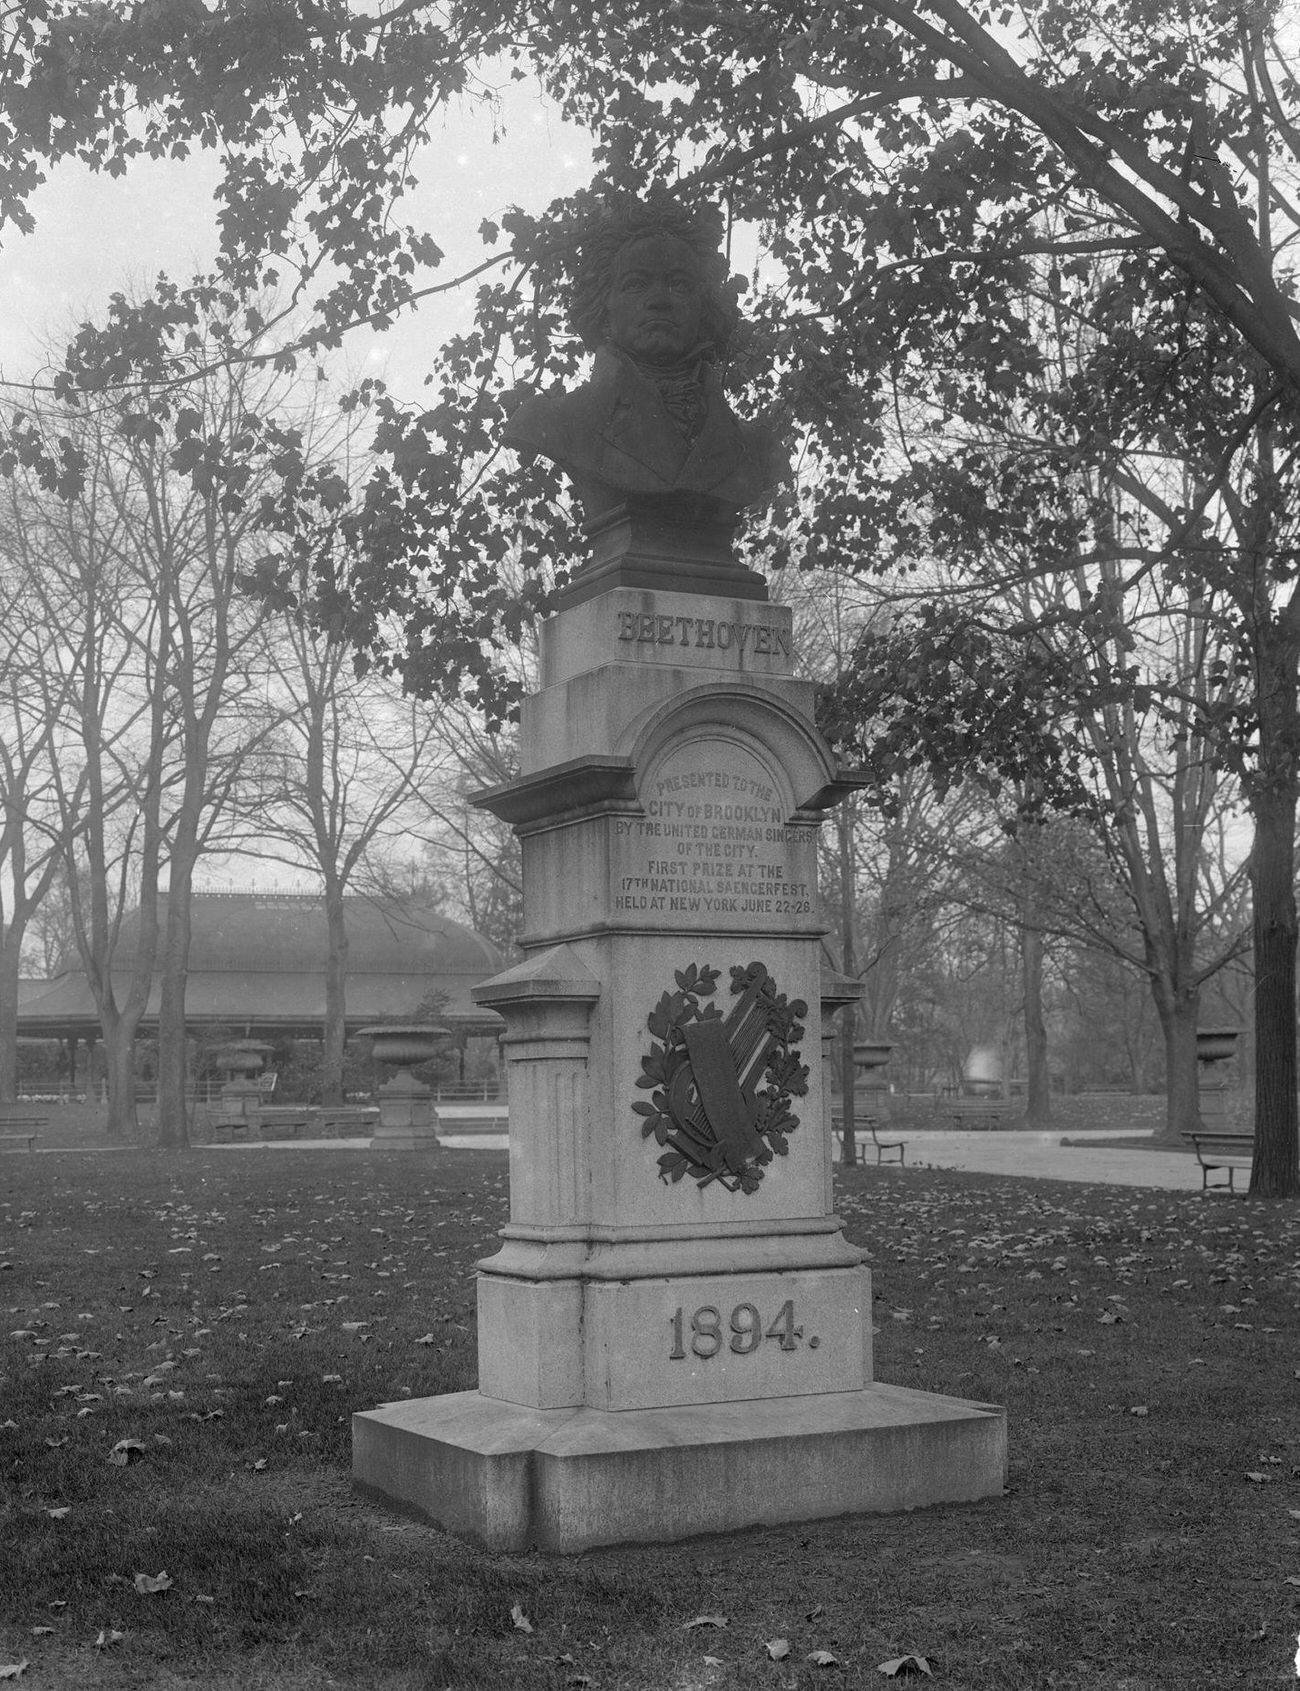 Statue Of Beethoven In Prospect Park, Brooklyn, 1895